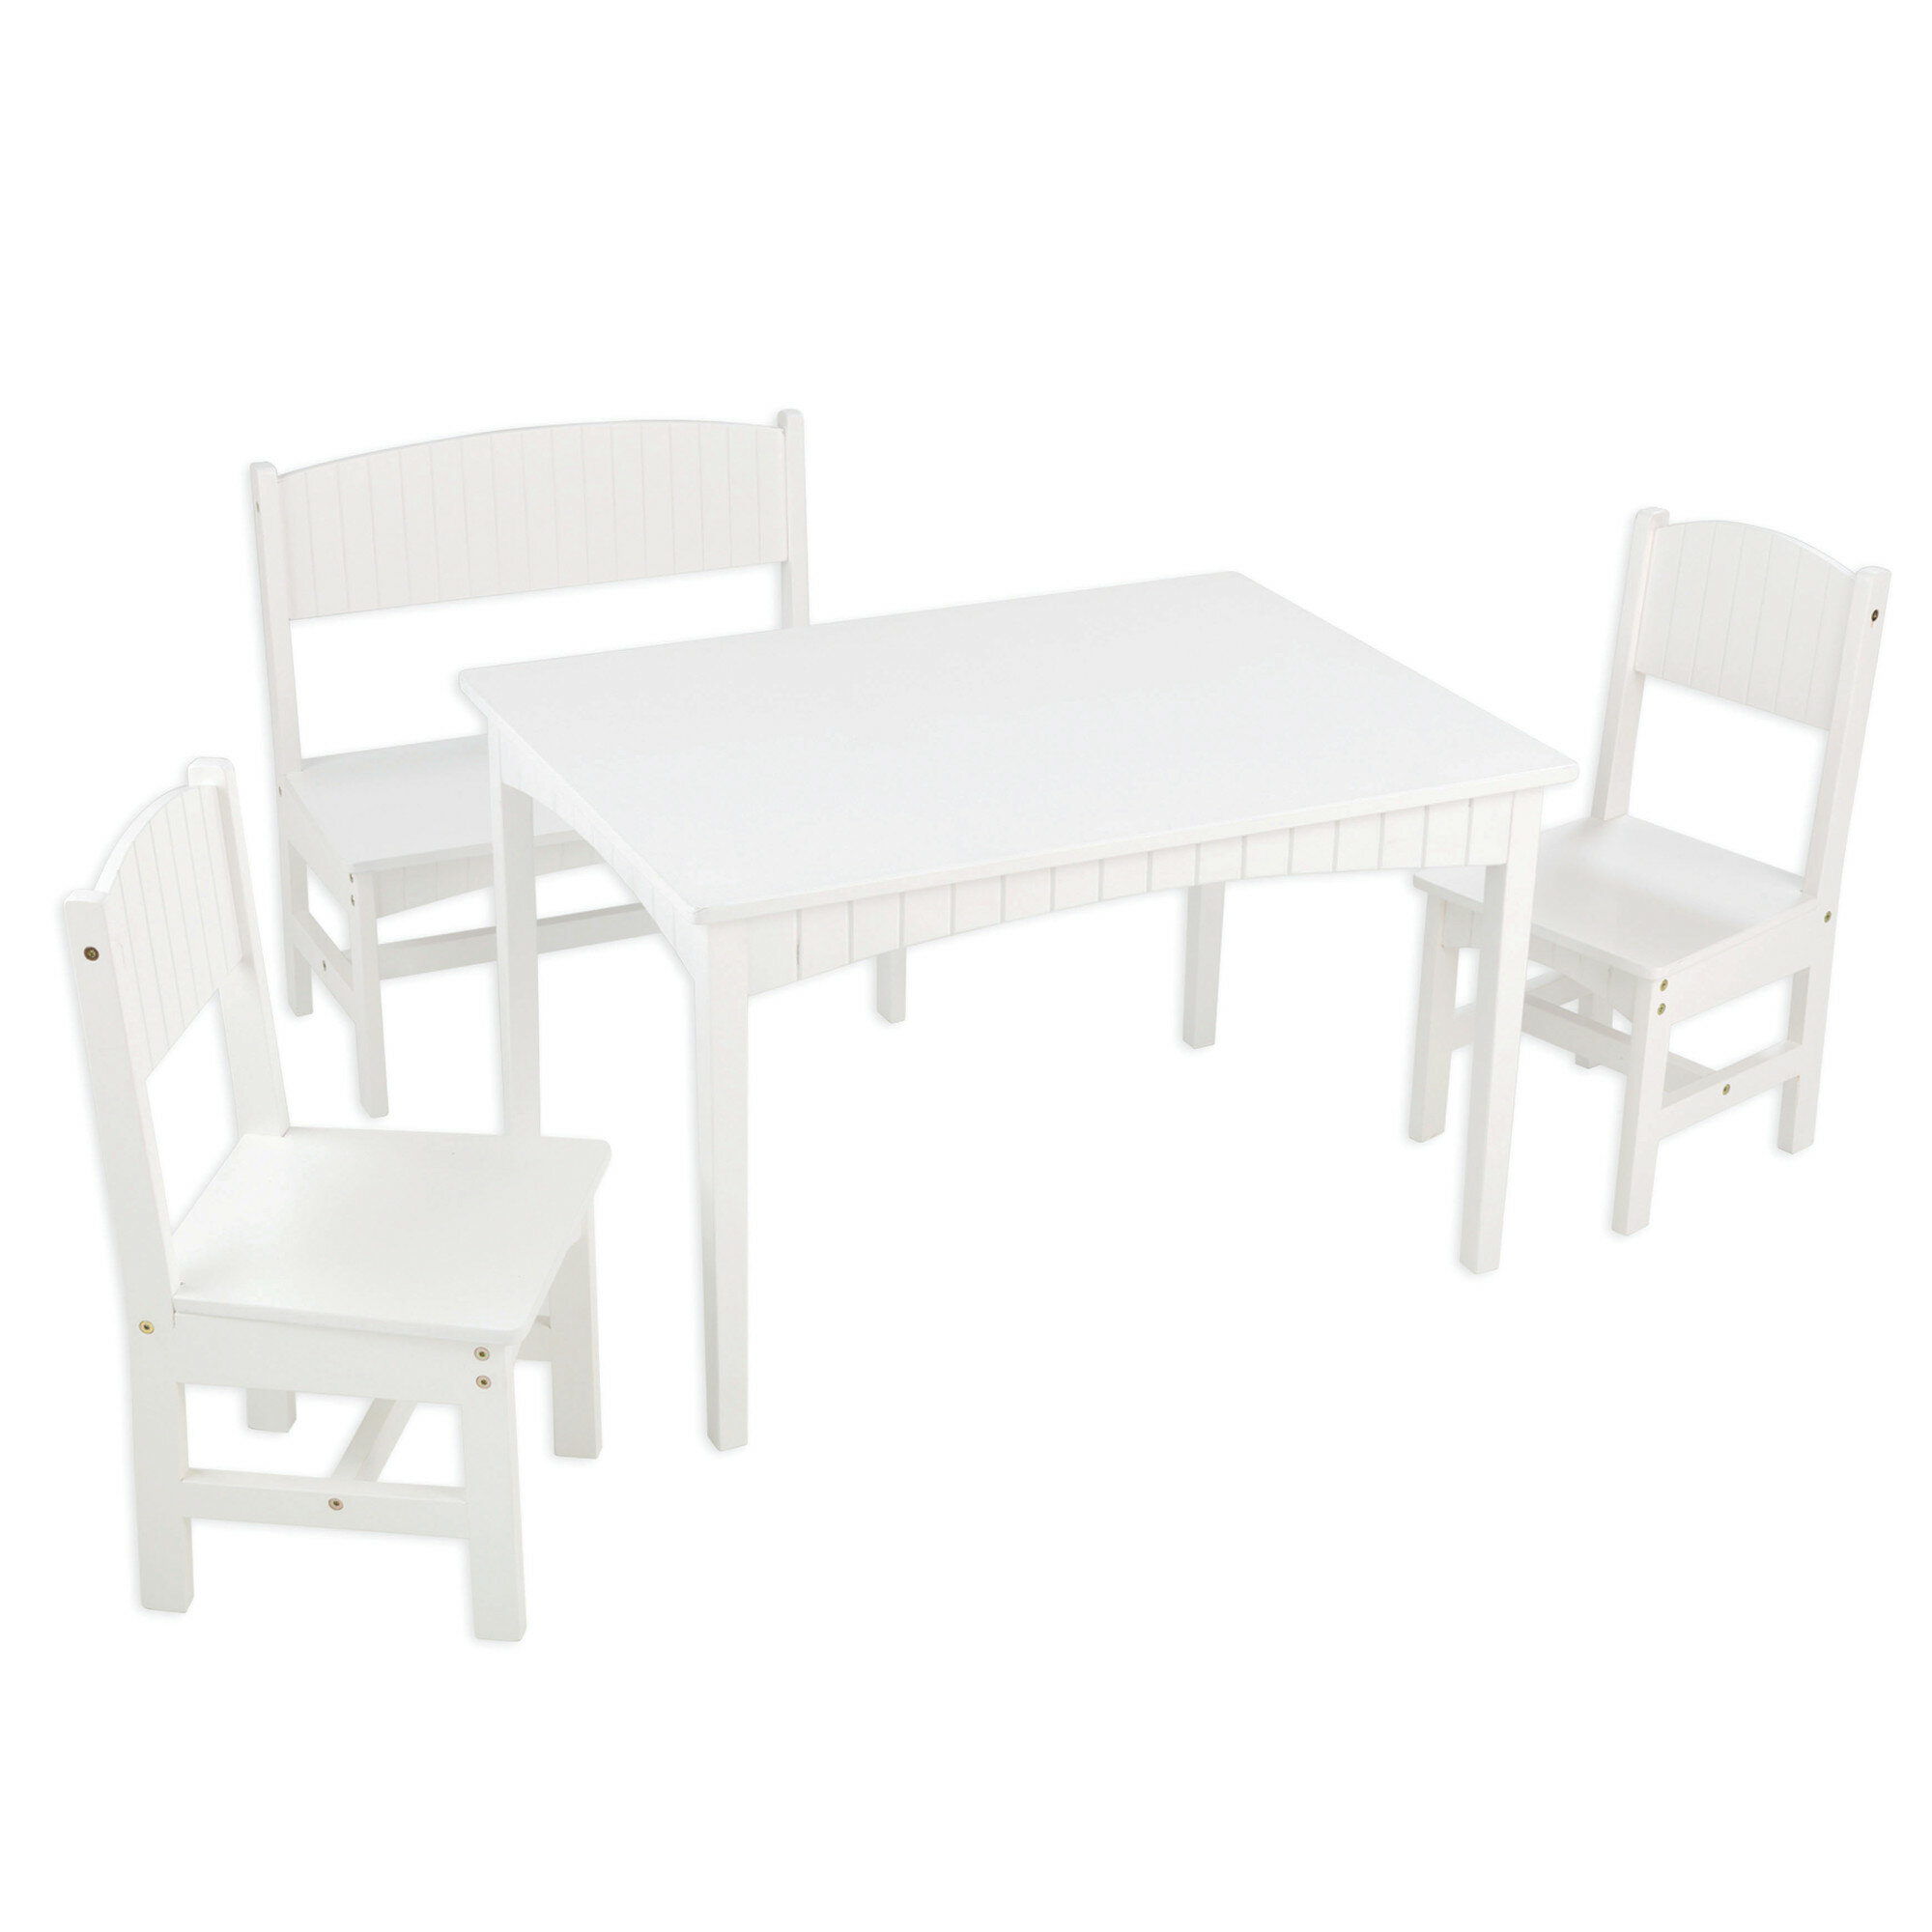 white play table with storage